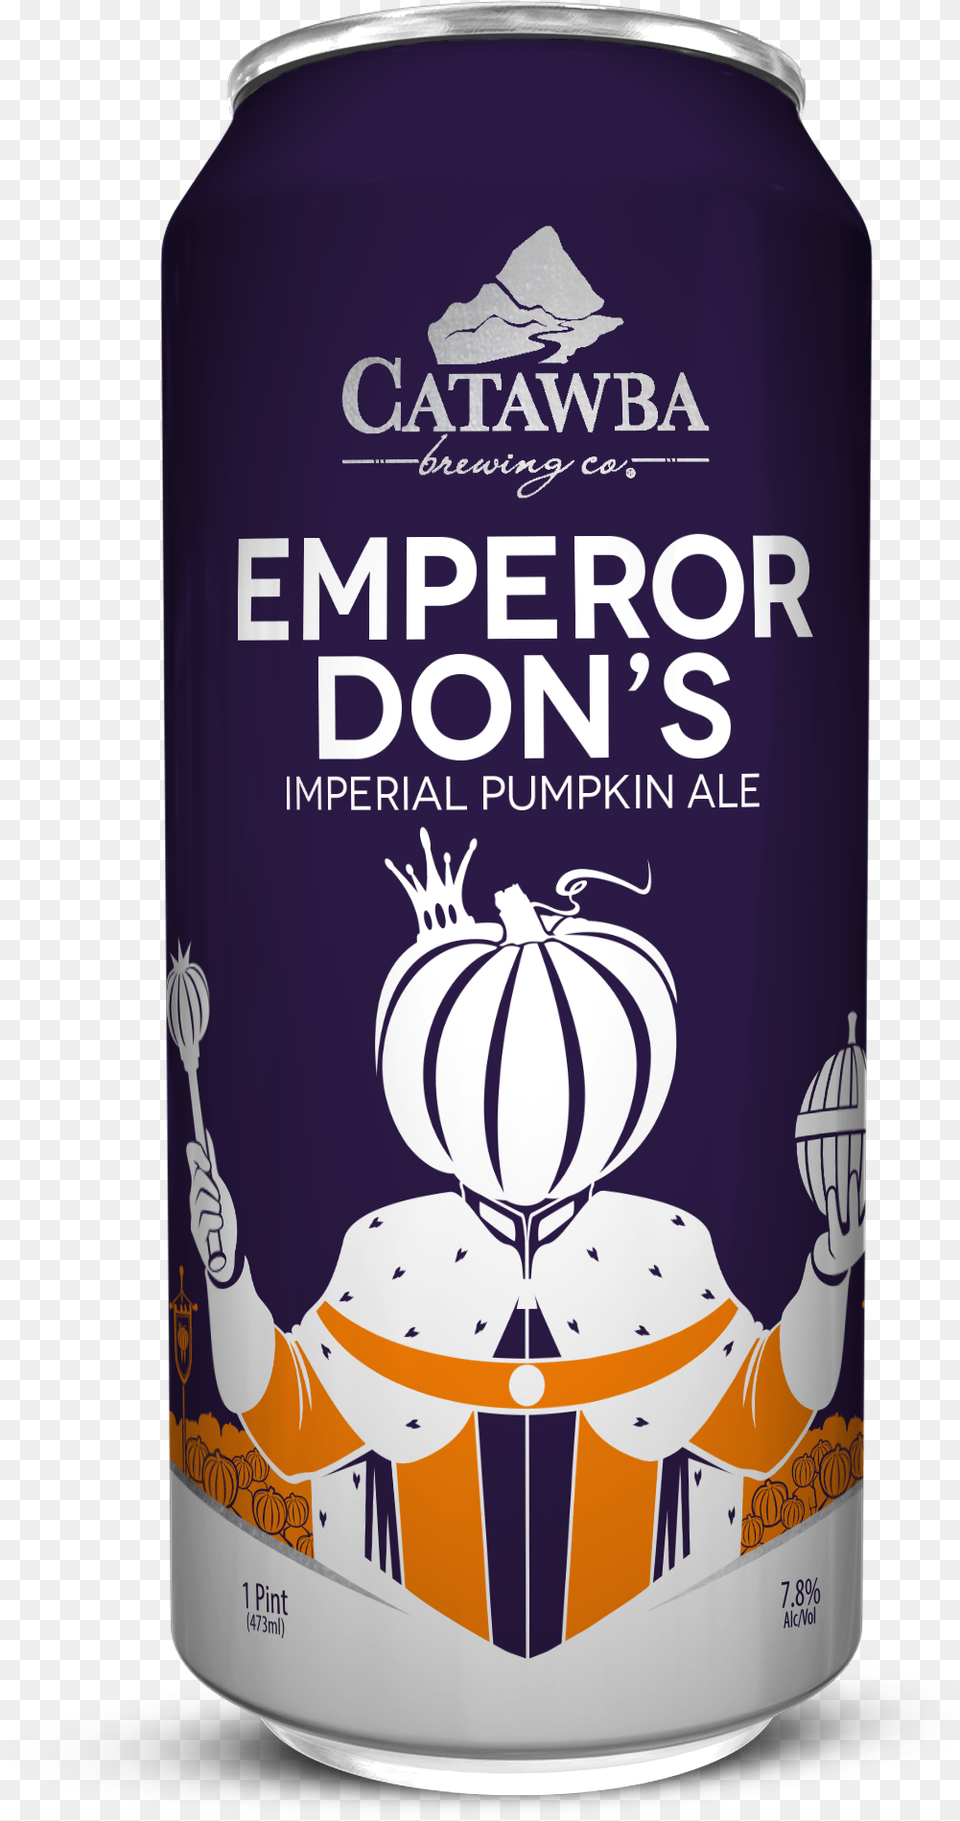 Emperor Dons Pumpkin Ale Catawba, Can, Tin, Beverage Free Png Download